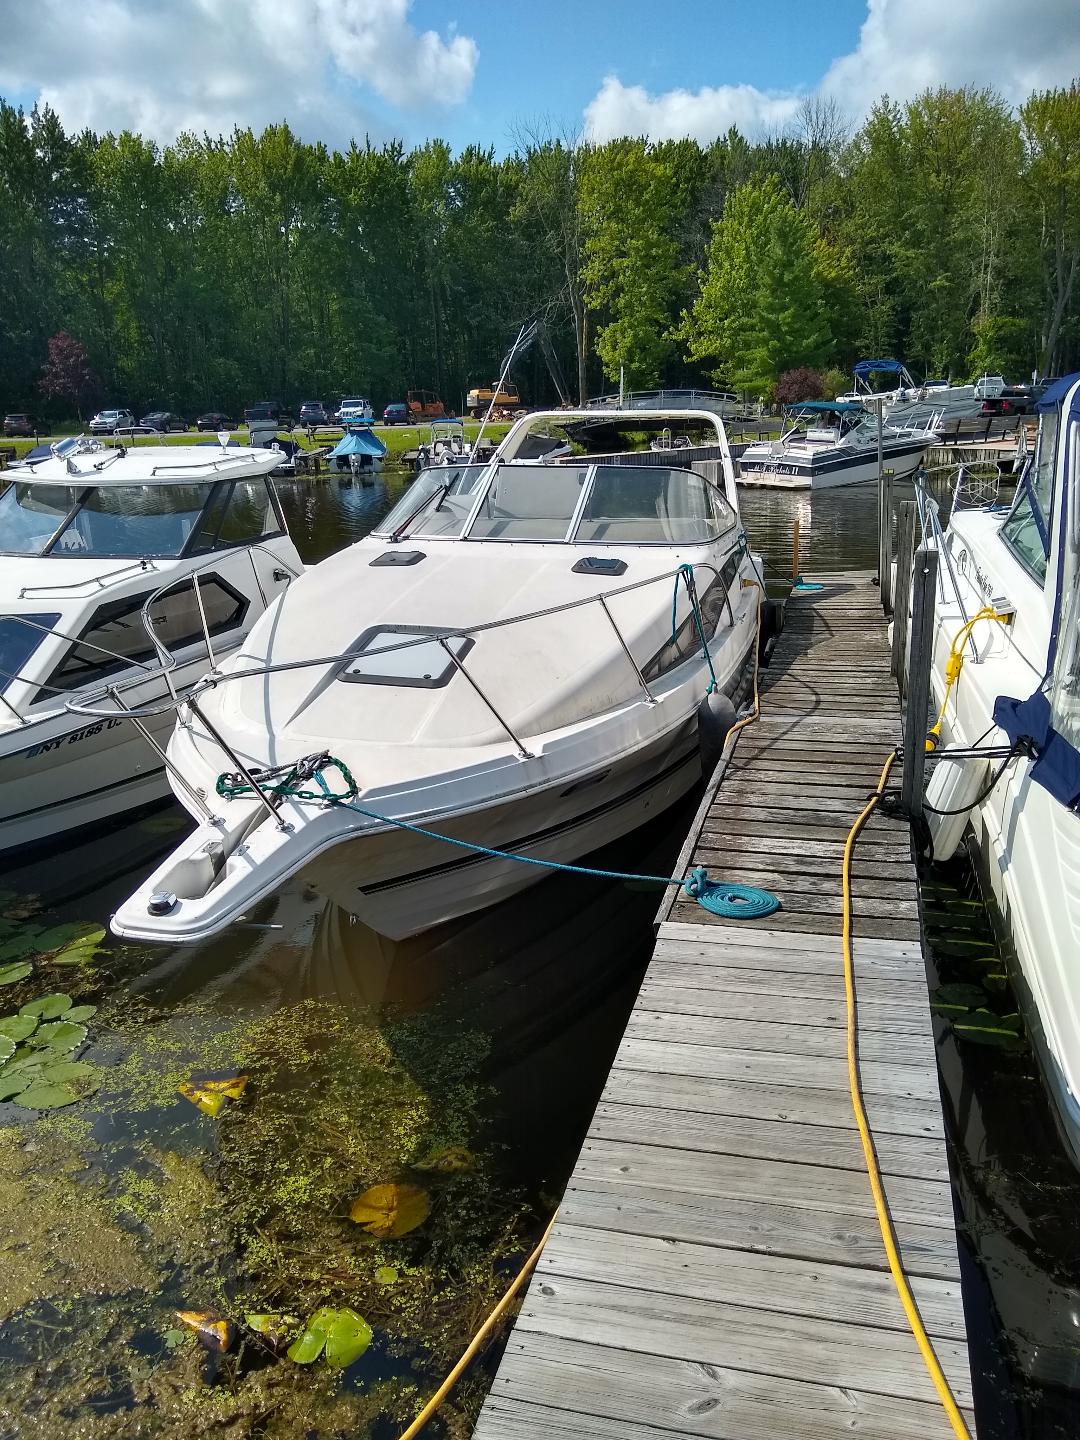 1995 Bayliner 2855 Power boat for sale in Brewerton, NY - image 1 